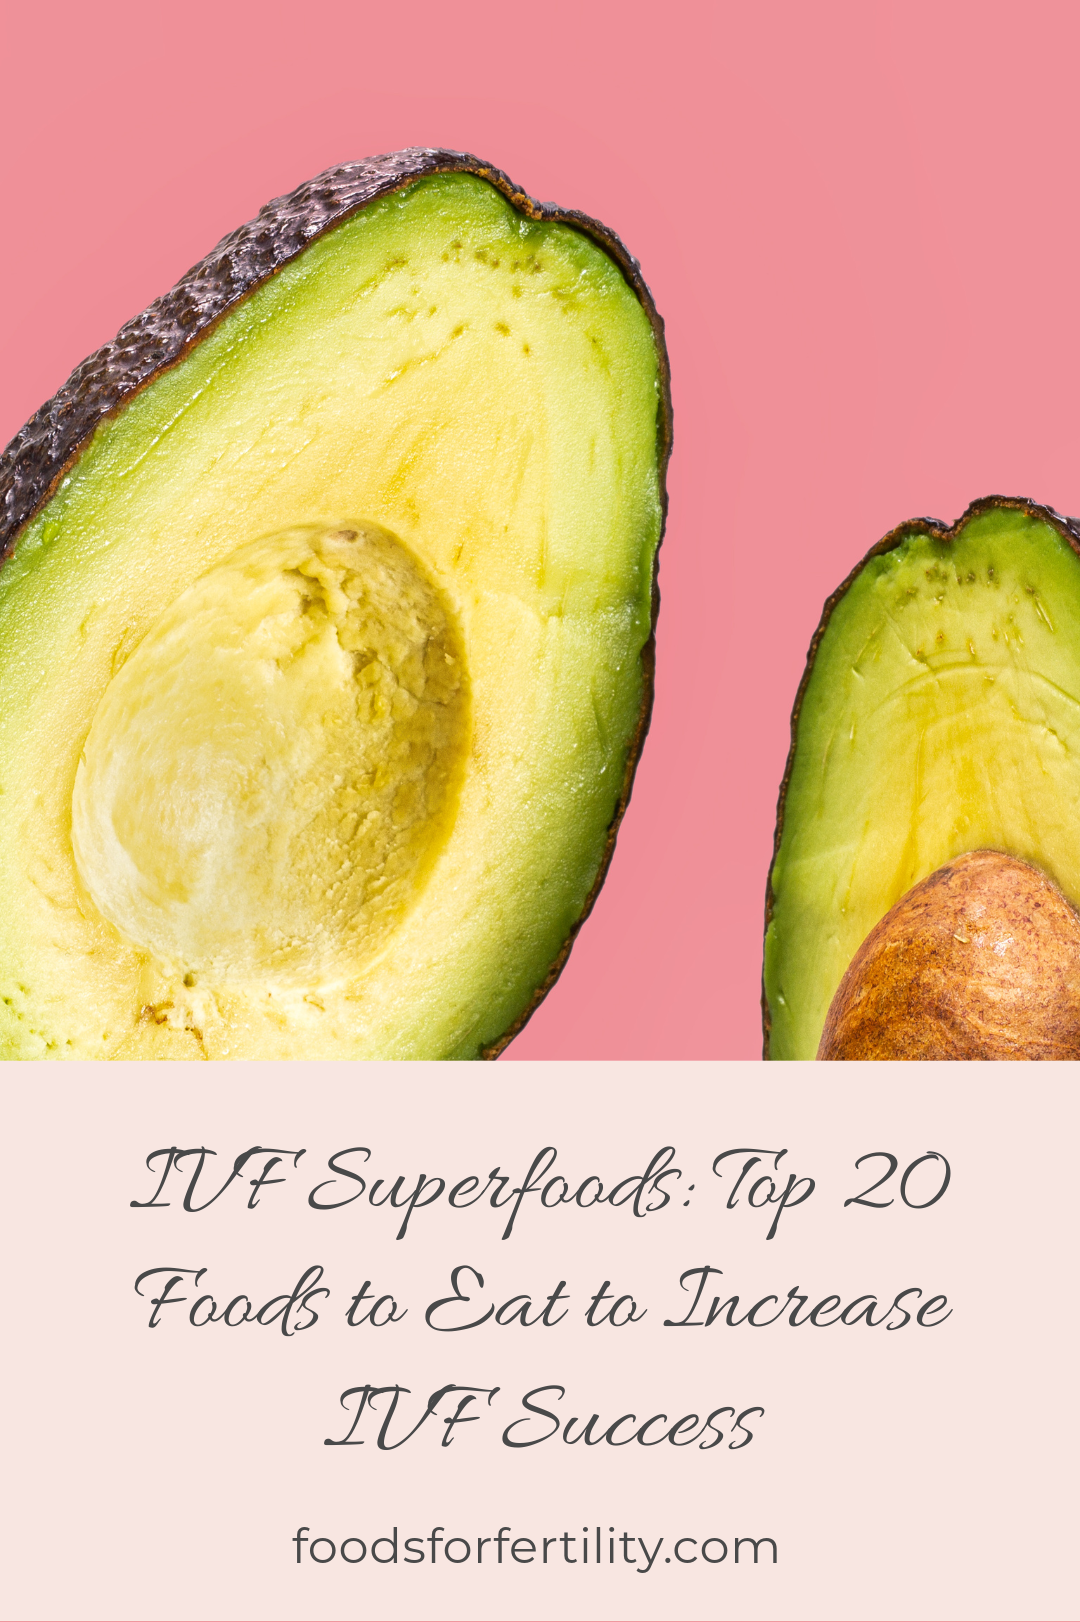 IVF Superfoods: Top 20 Foods to Eat to Increase IVF Success